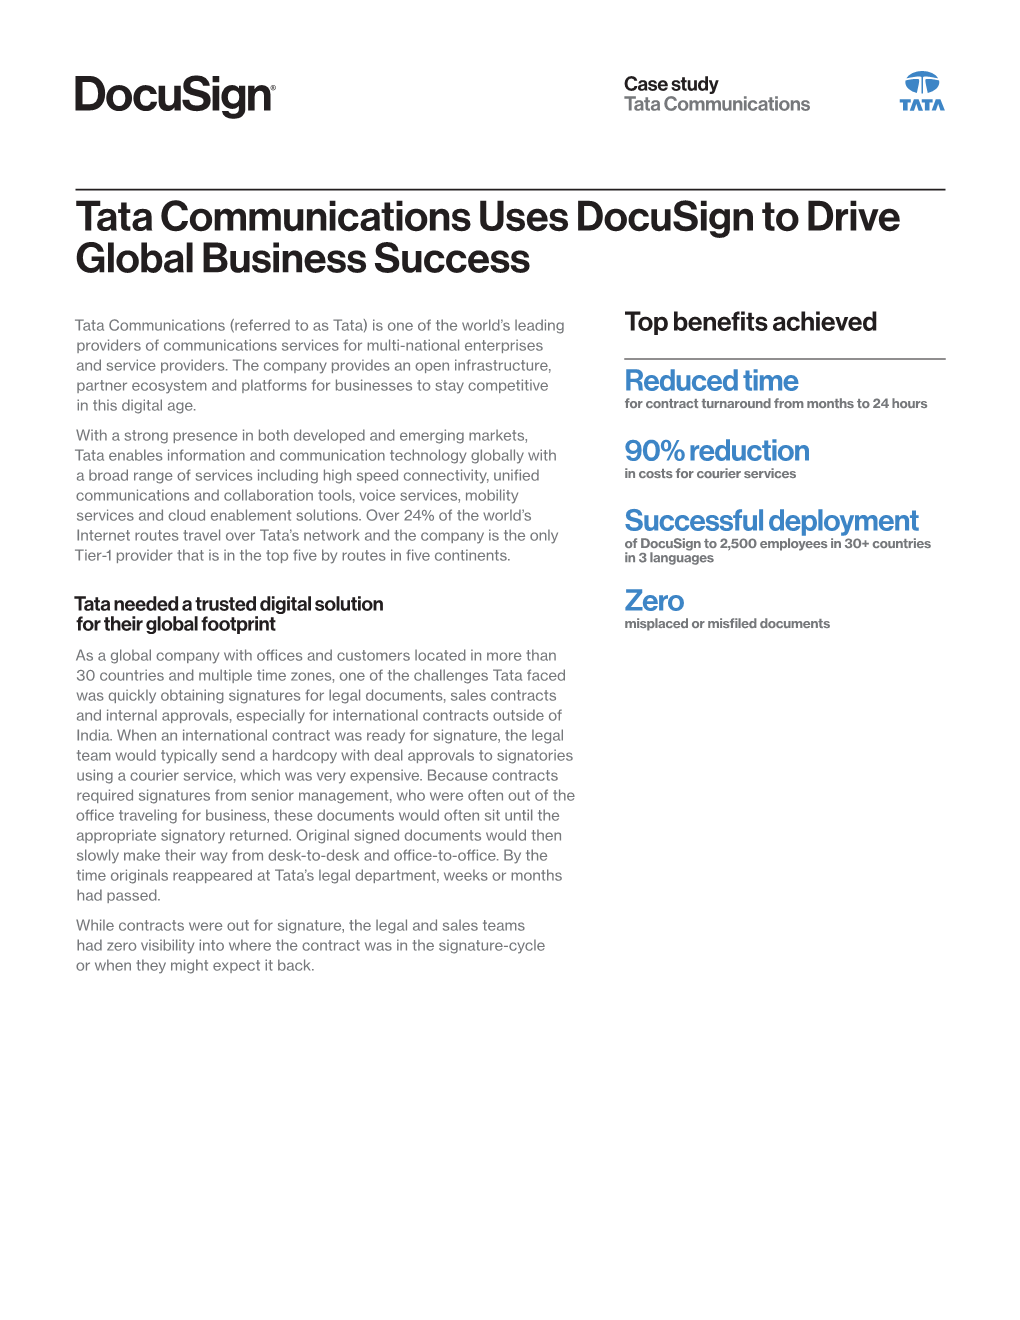 Tata Communications Uses Docusign to Drive Global Business Success